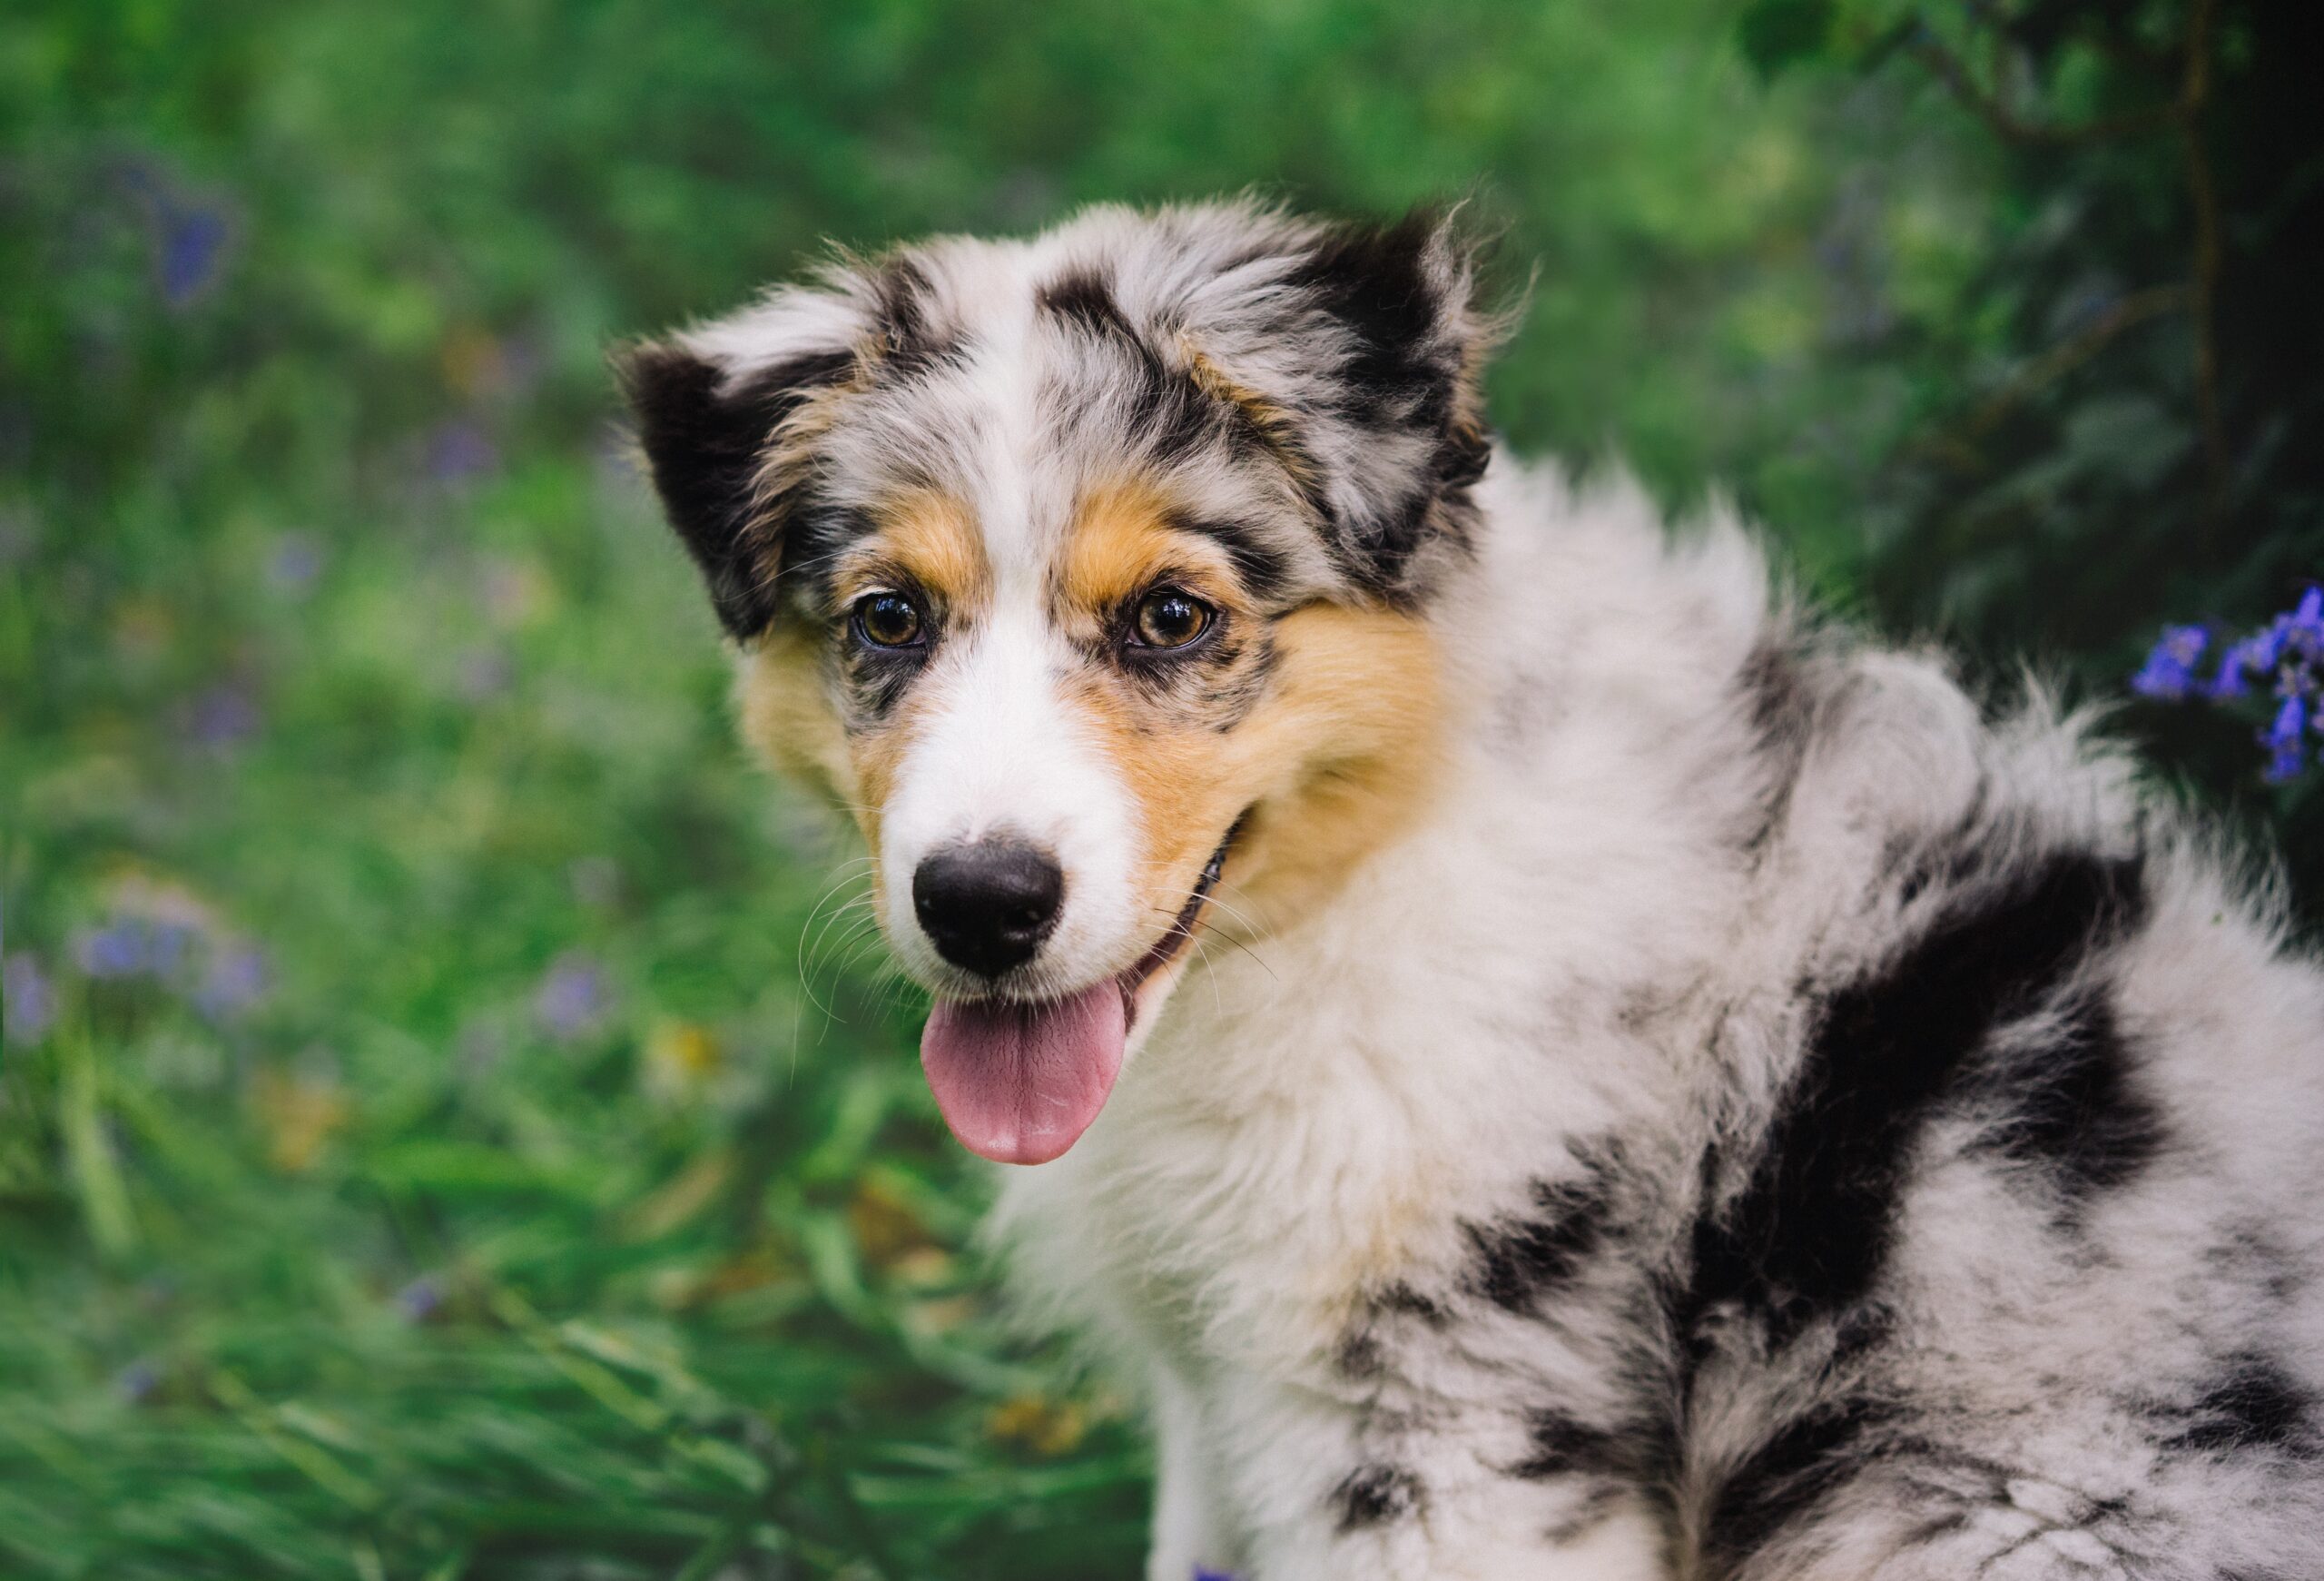 5 Emergency Red Flags for Australian Shepherd Owners: If Your Dog Does These, Rush Them to The Vet